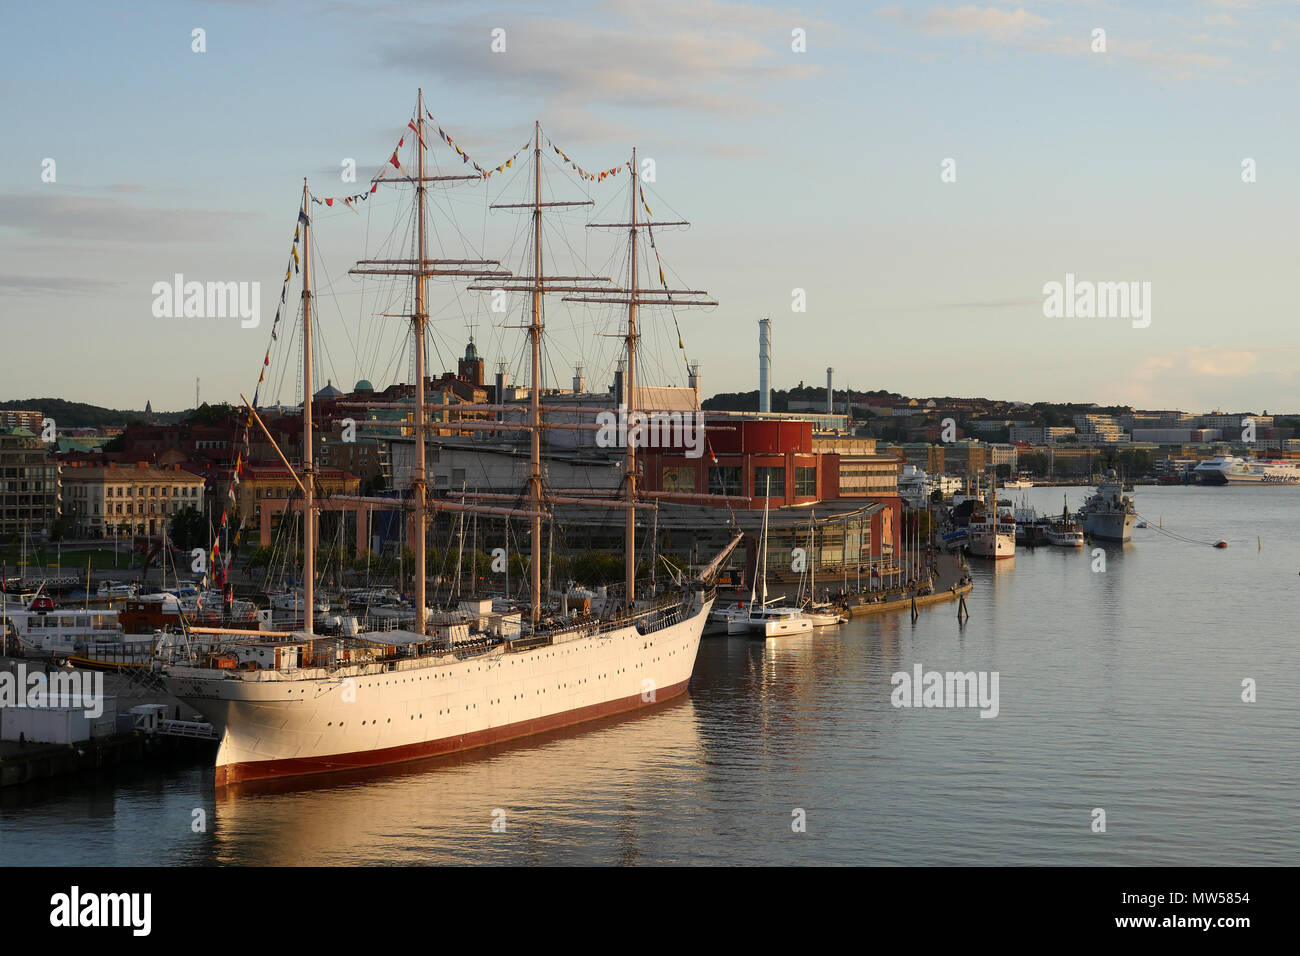 Barken Viking, a tall ship used as a hotel in Gothenburg Stock Photo